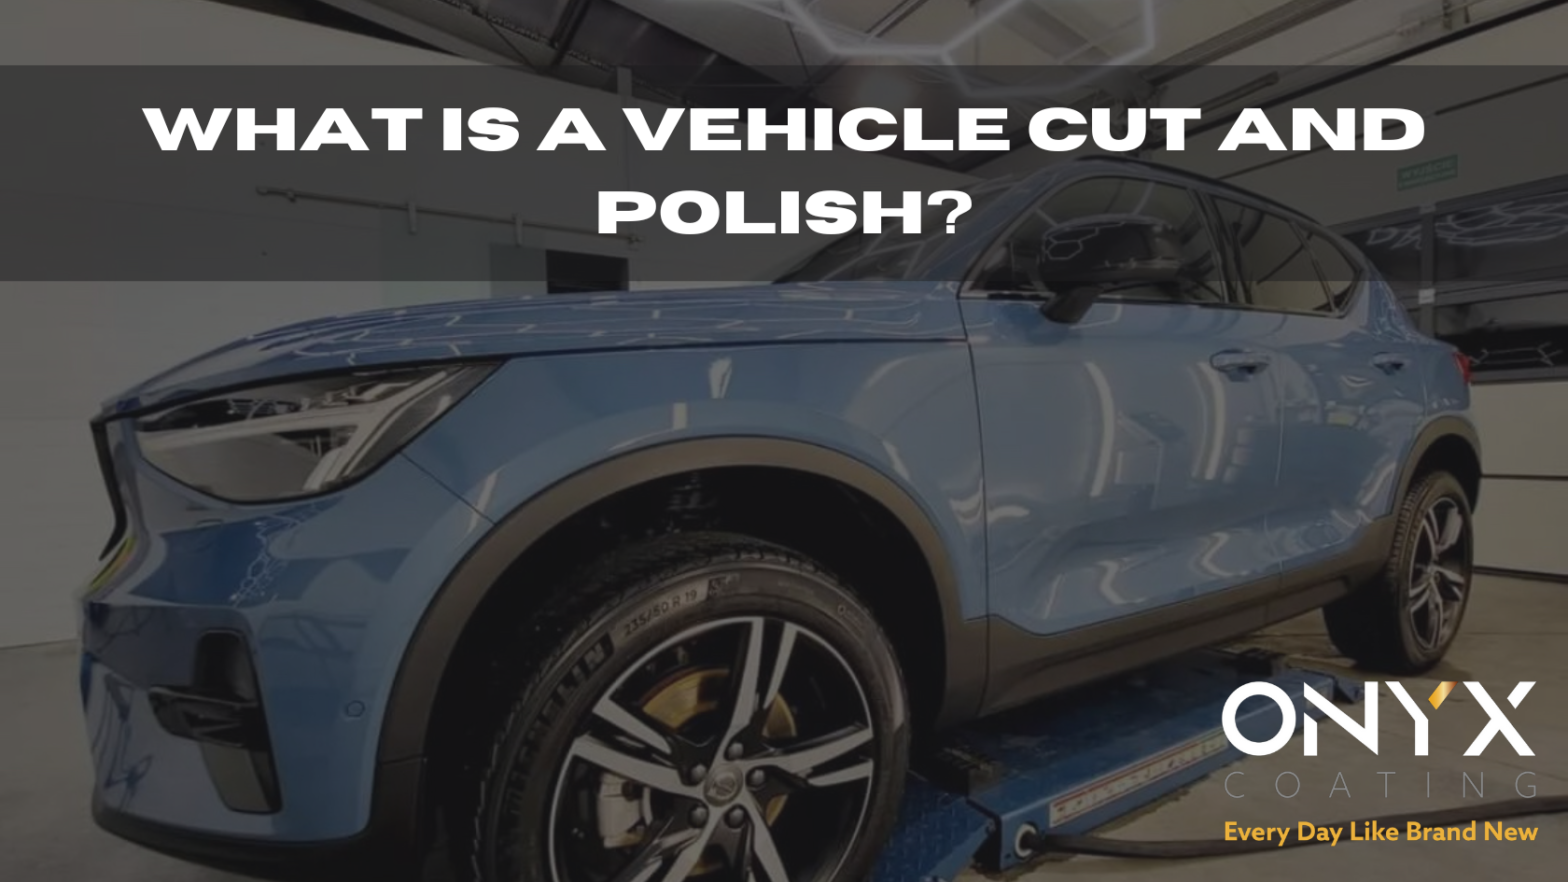 What is a vehicle cut and polish?